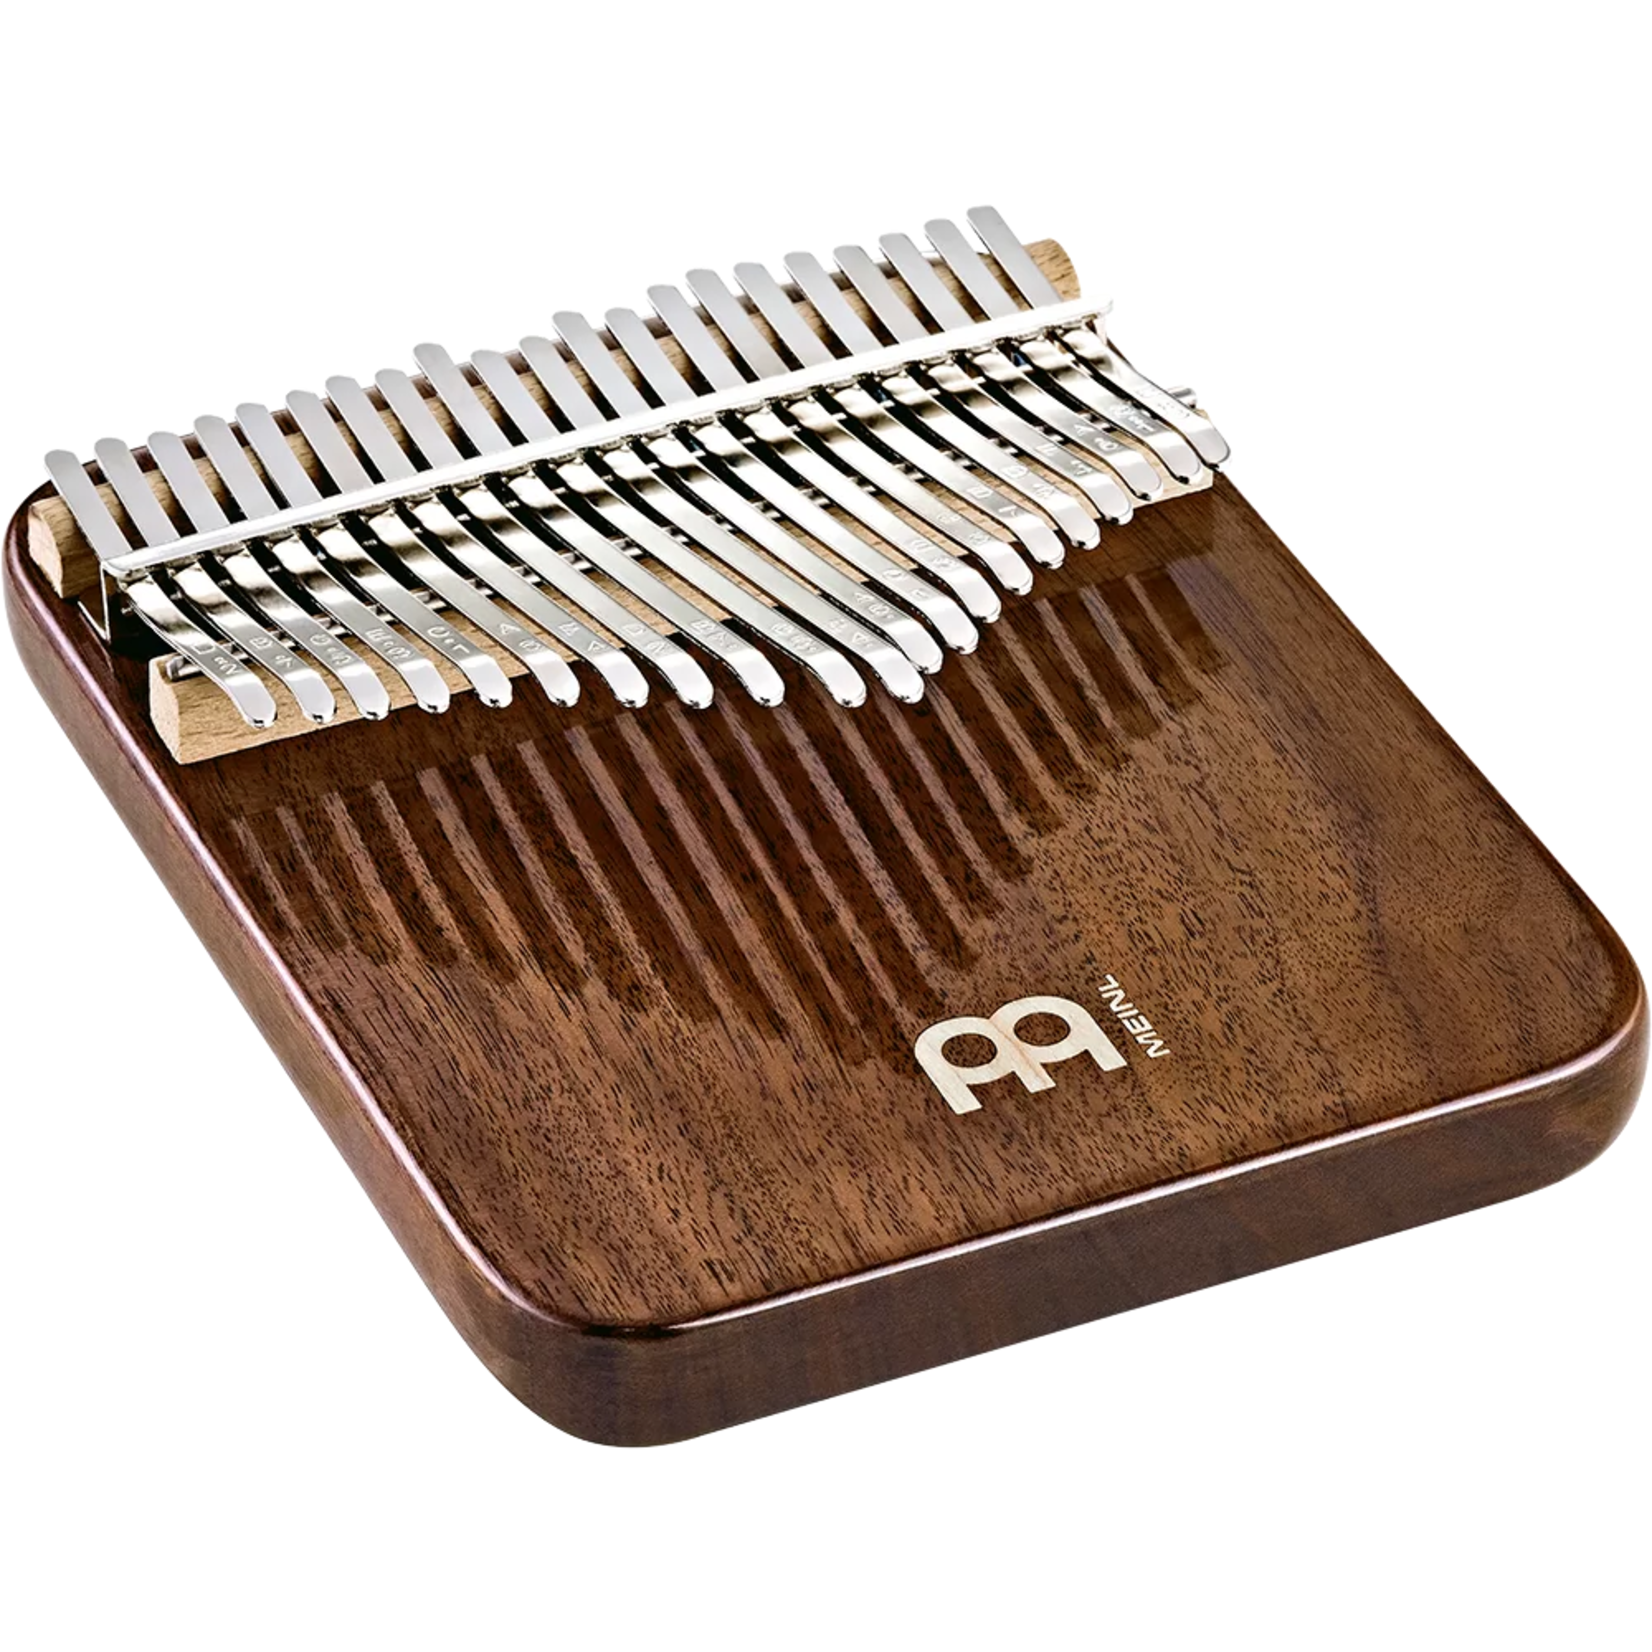 Meinl Meinl Sonic Energy Solid Kalimba, 21 Notes, Black Walnut (with Bag) KL2101S